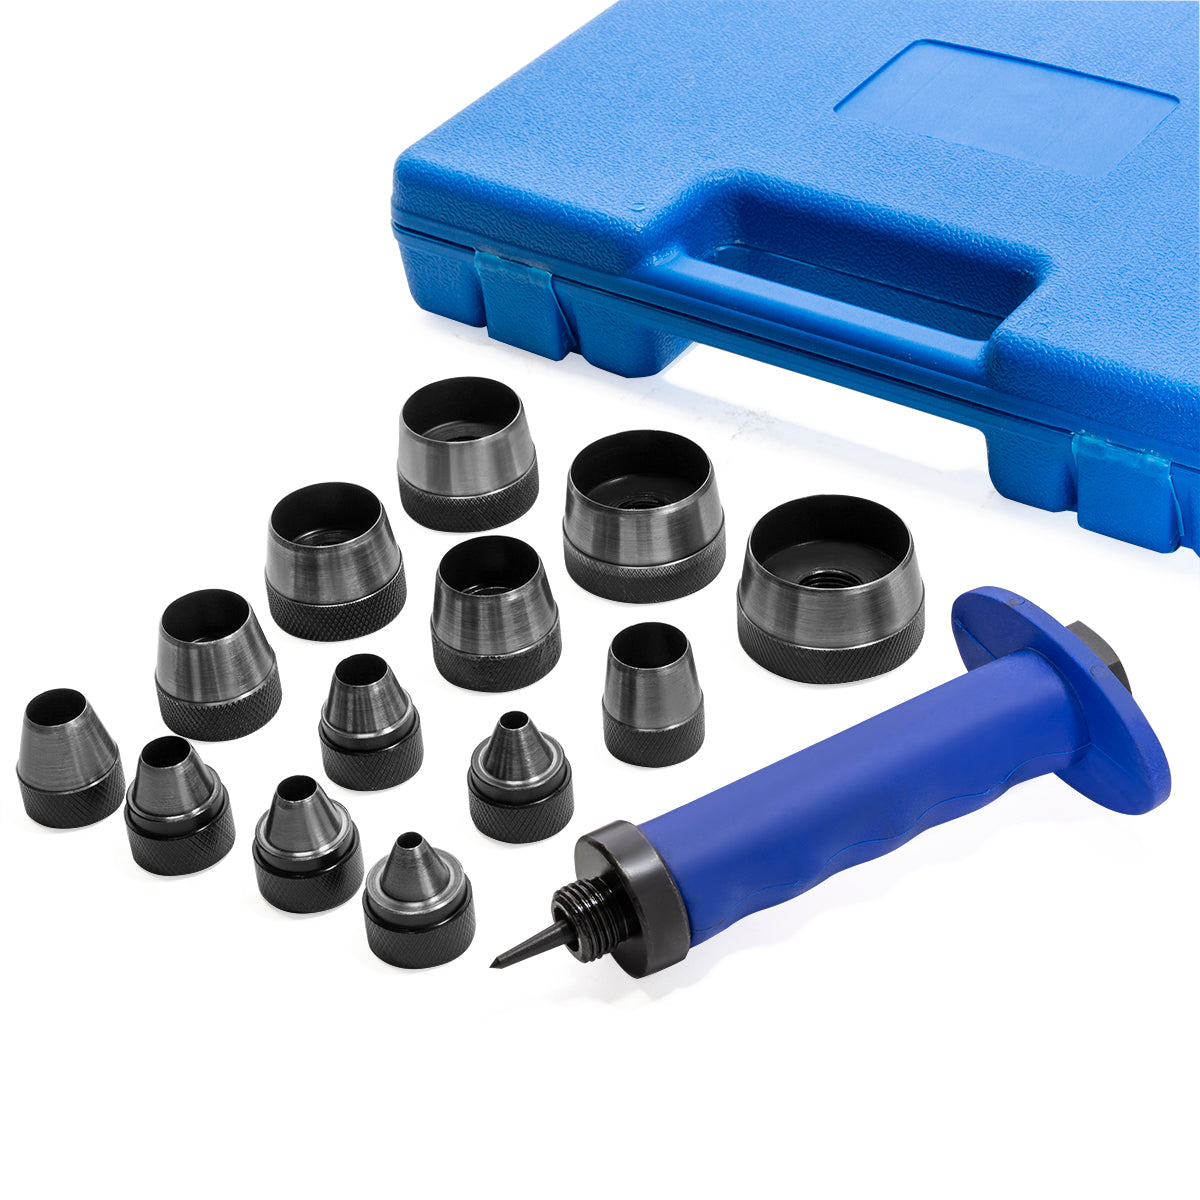 15 Piece Hammer/Chisel/Pin Punch Set